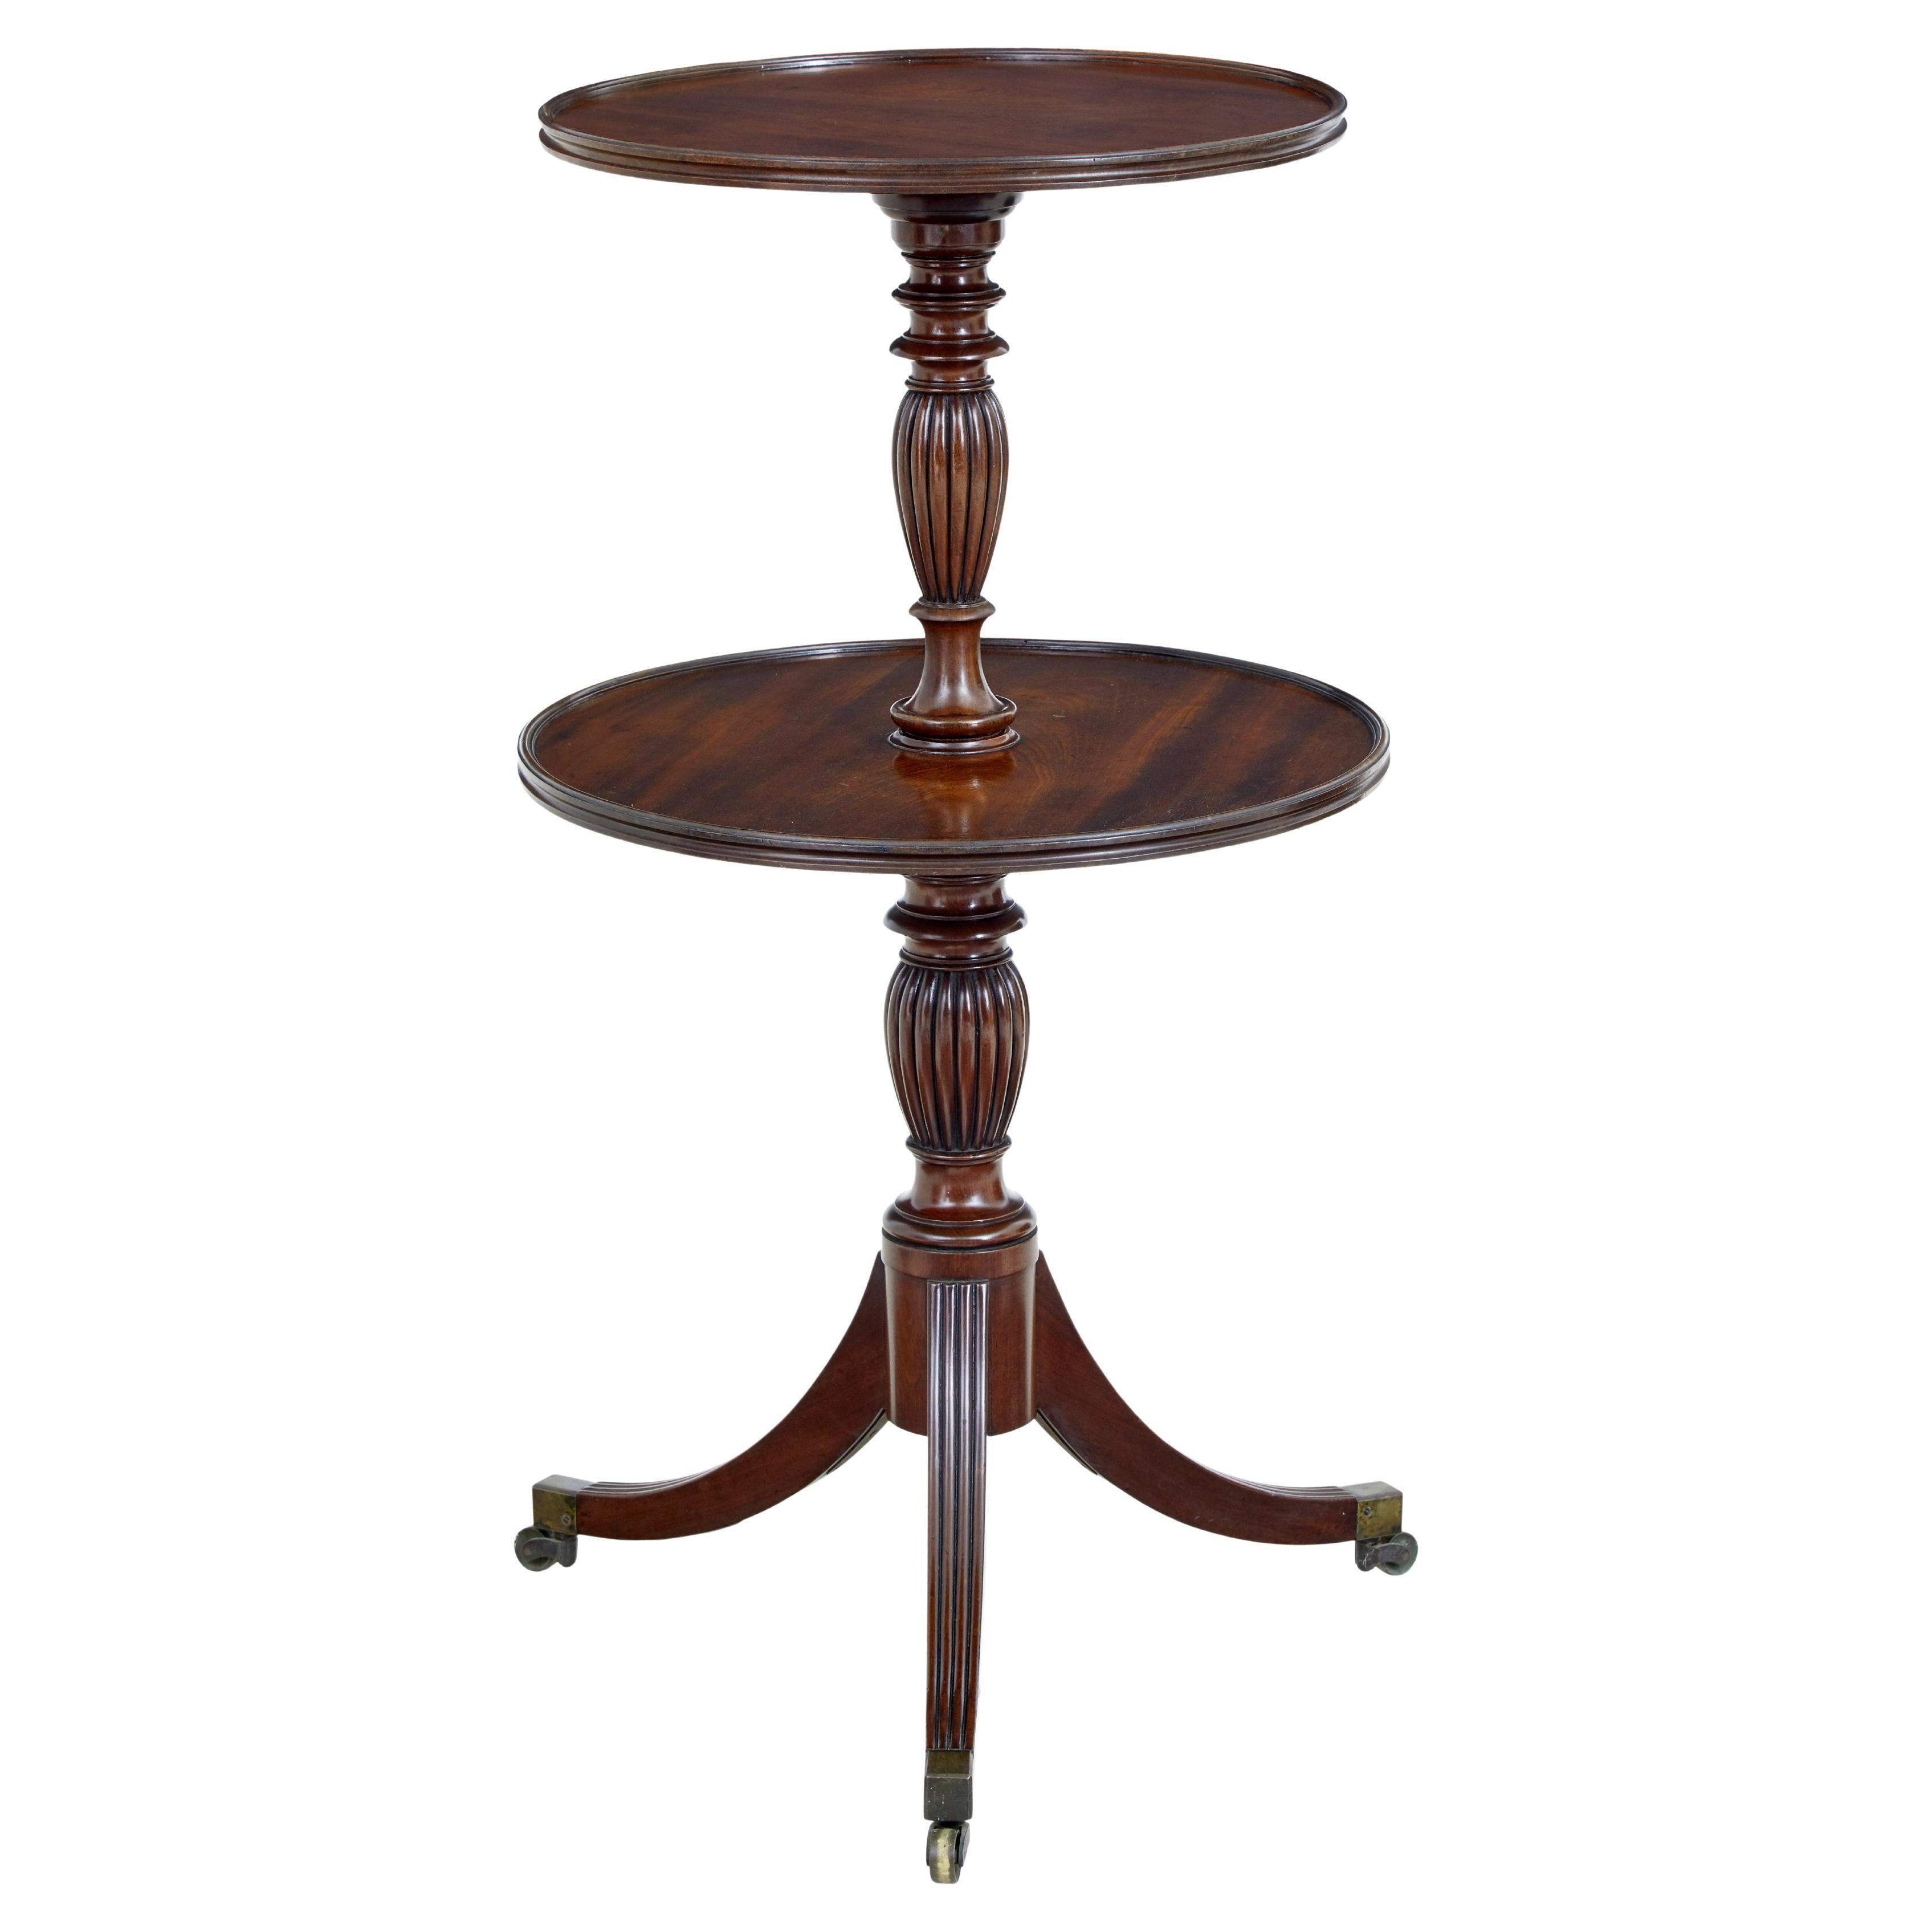 19th century William IV mahogany 2 tier circular serving table For Sale